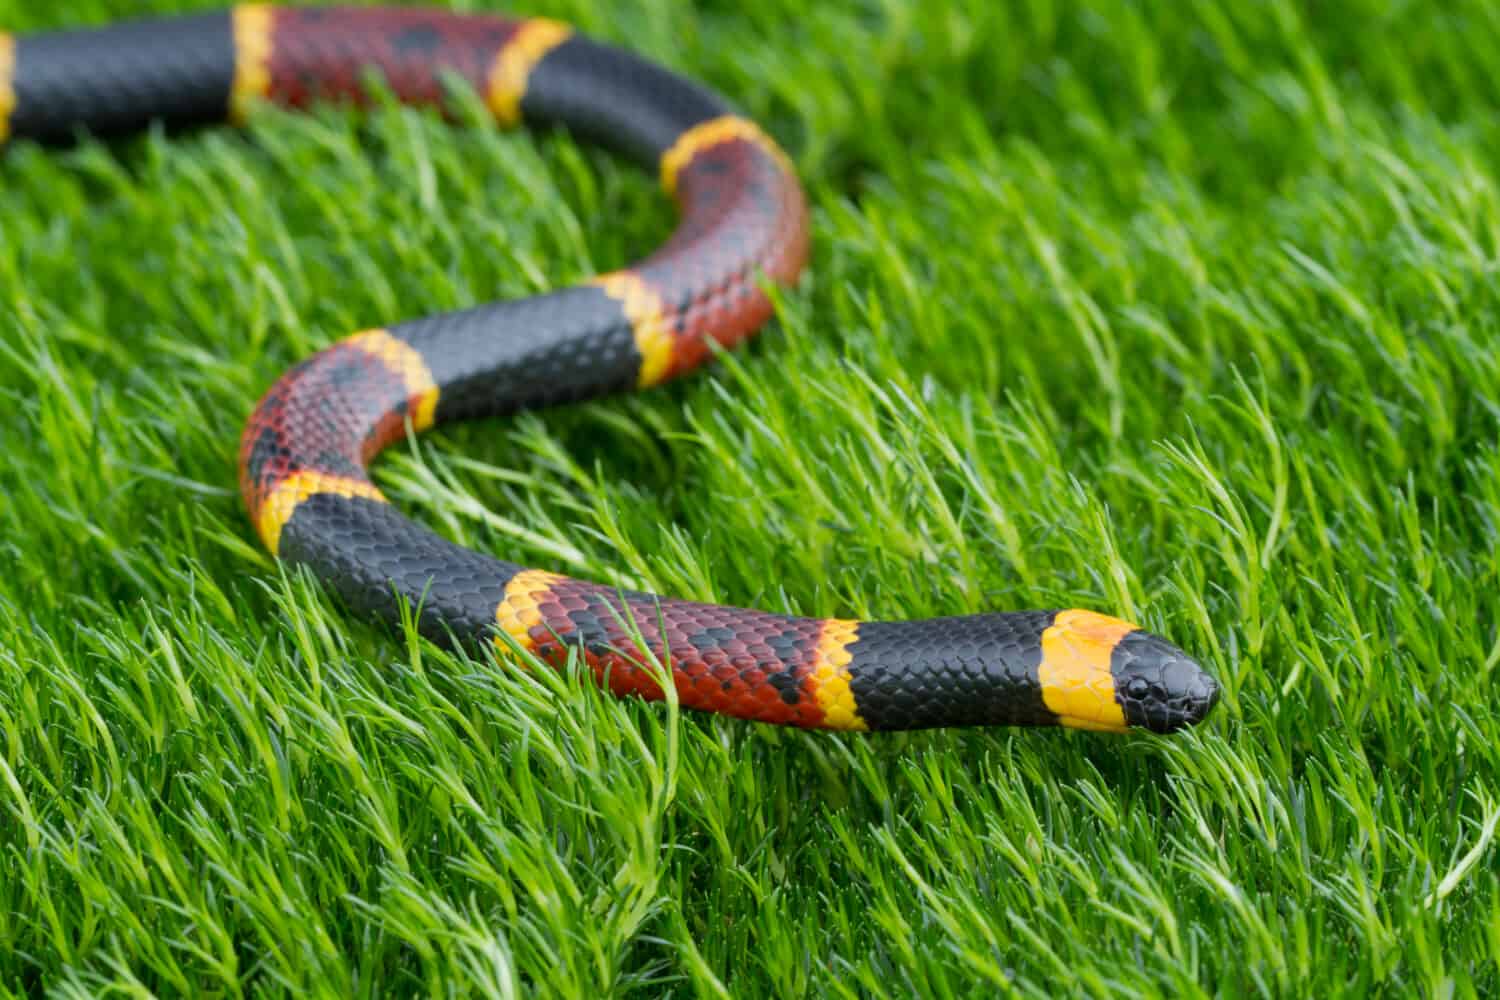 A coral snake on green grass.